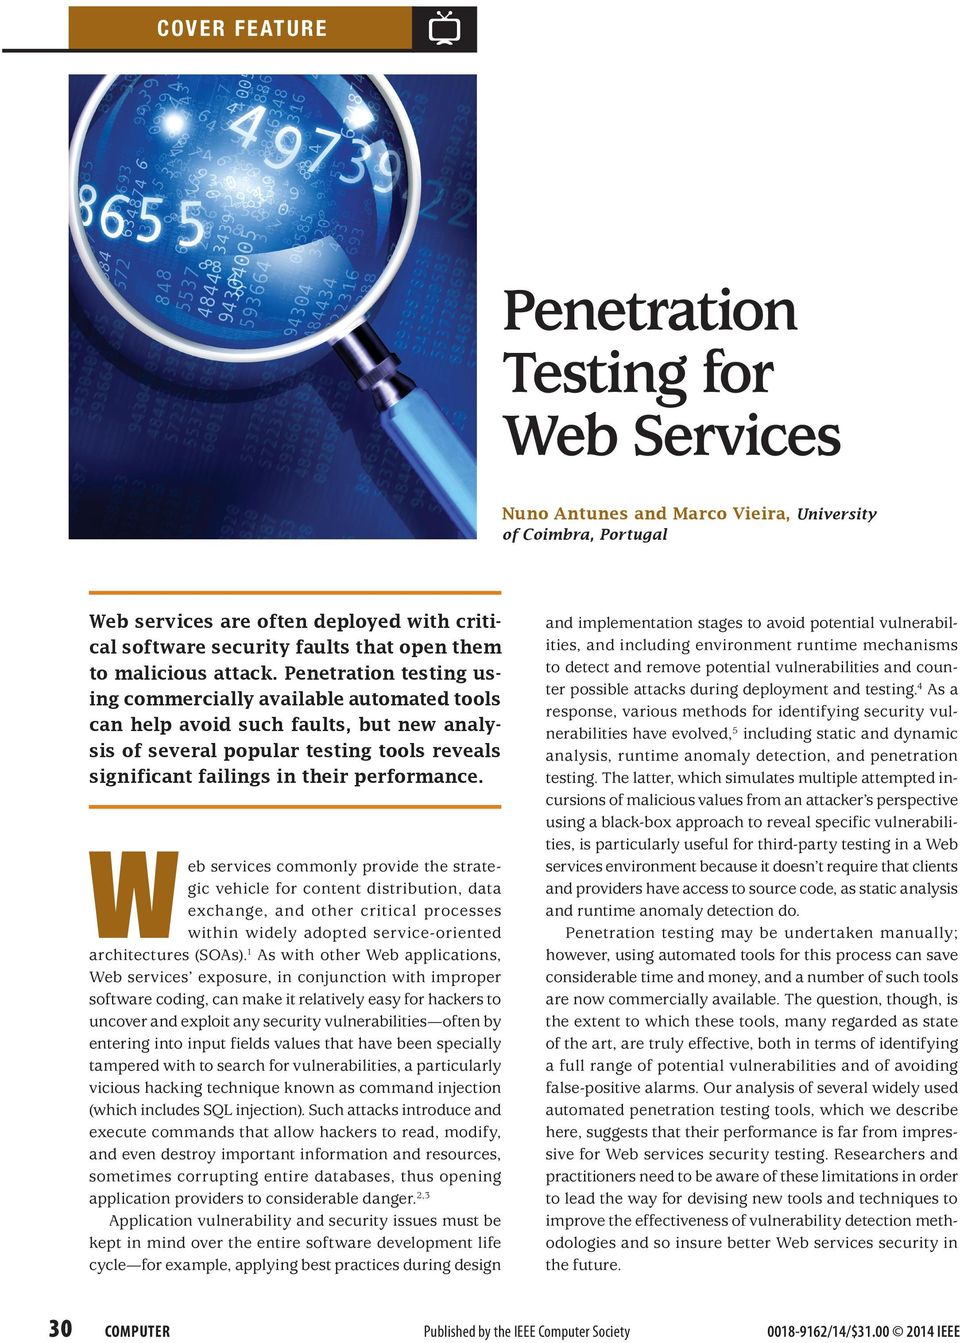 Penetration testing using commercially available automated tools can help avoid such faults, but new analysis of several popular testing tools reveals significant failings in their performance.